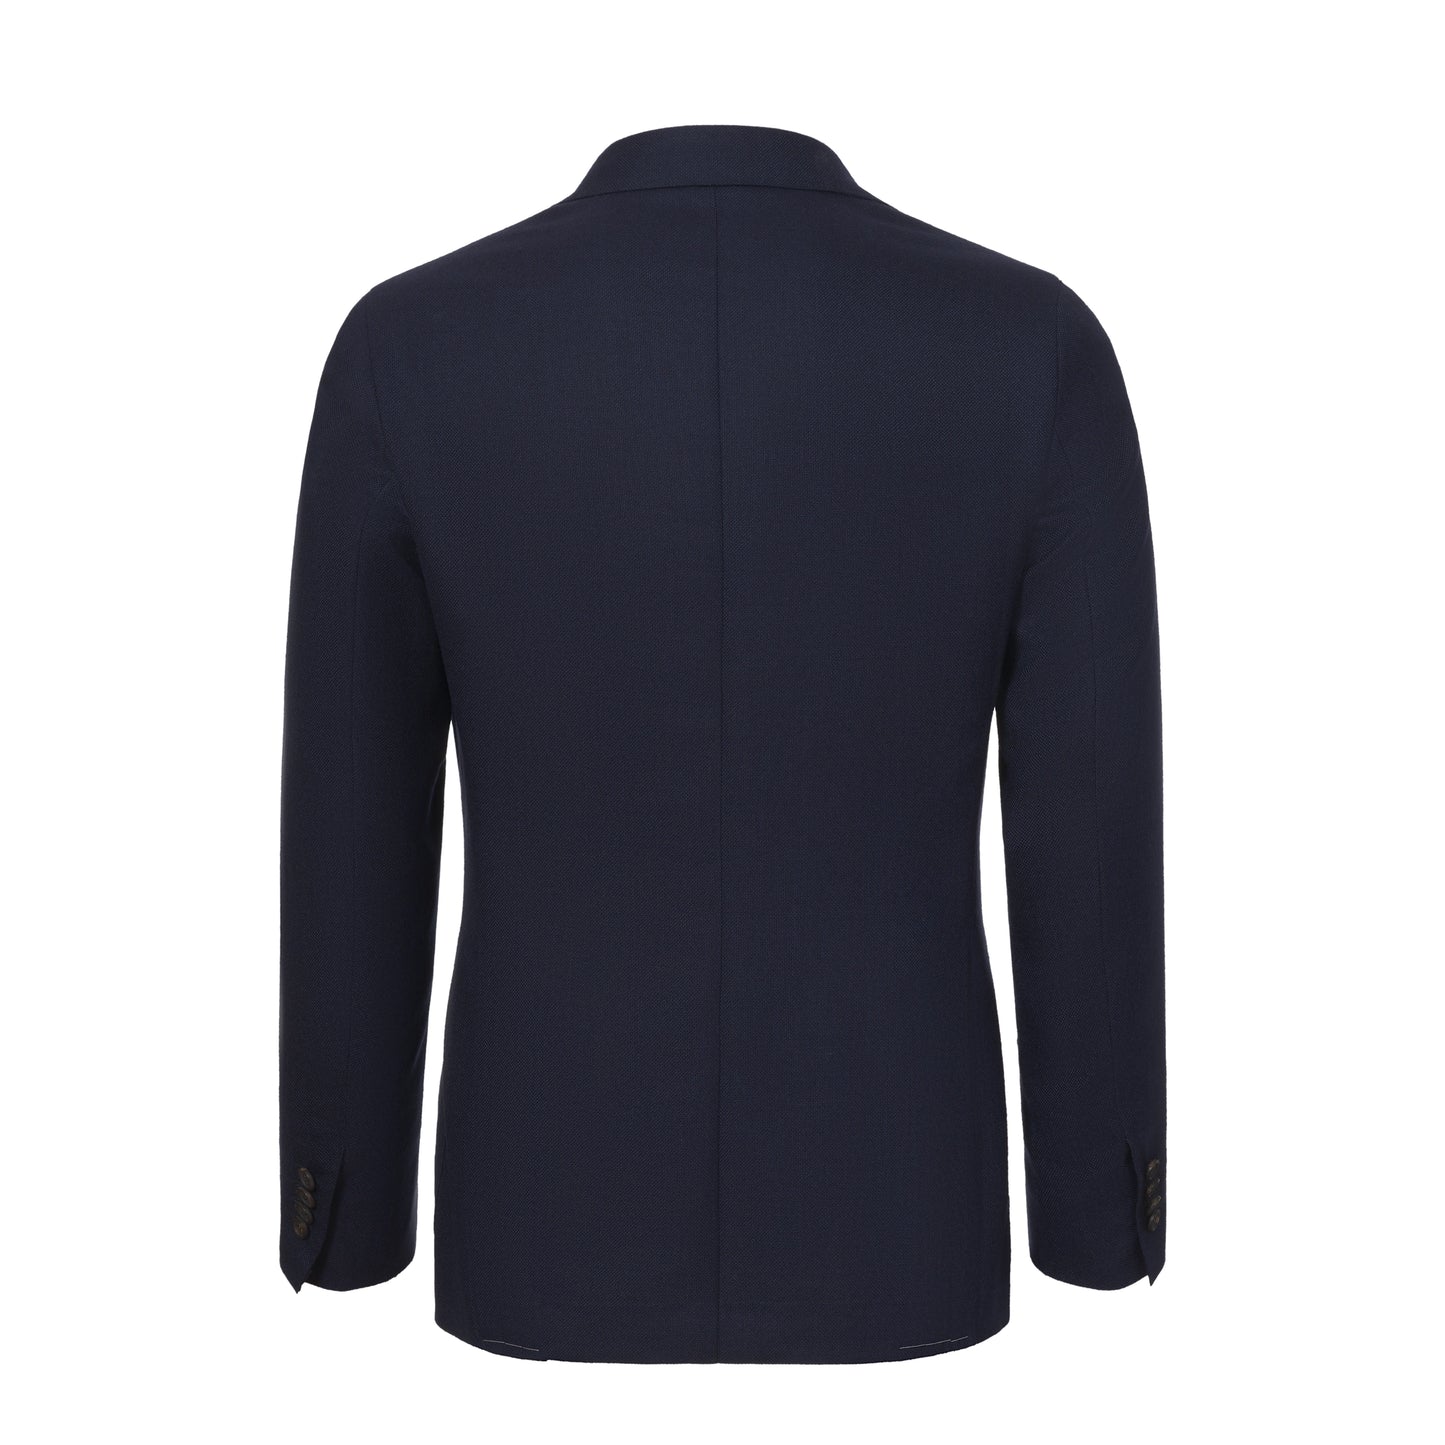 Single-Breasted Wool Jacket in Navy Blue Melange. Exclusively Made for Sartale